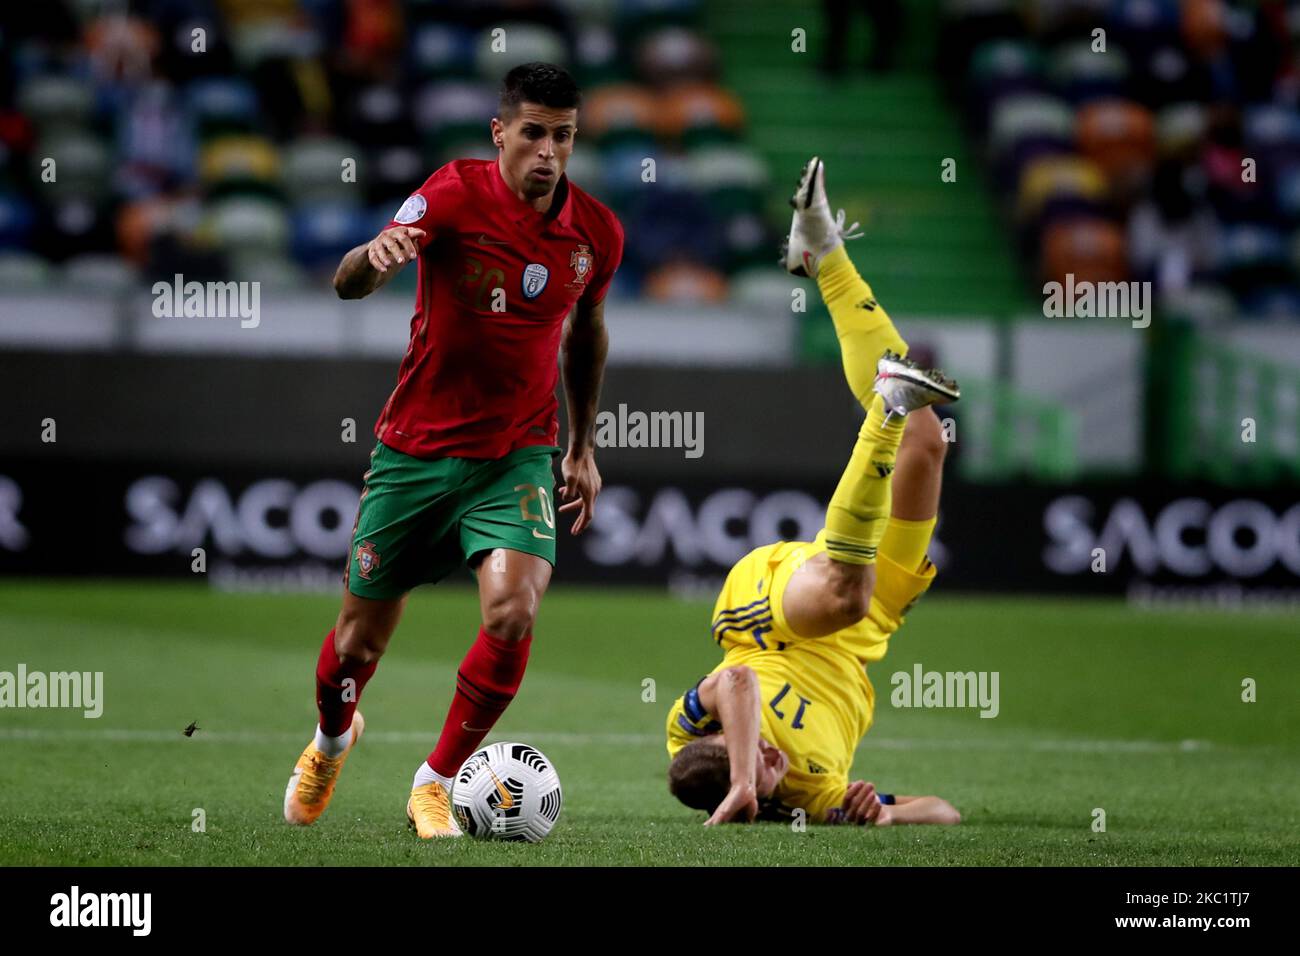 Joao Cancelo of Portugal (L) vies with Viktor Claesson of Sweden during the UEFA Nations League group stage match between Portugal and Sweden, at the Jose Alvalade stadium in Lisbon, Portugal, on October 14, 2020. (Photo by Pedro FiÃºza/NurPhoto) Stock Photo